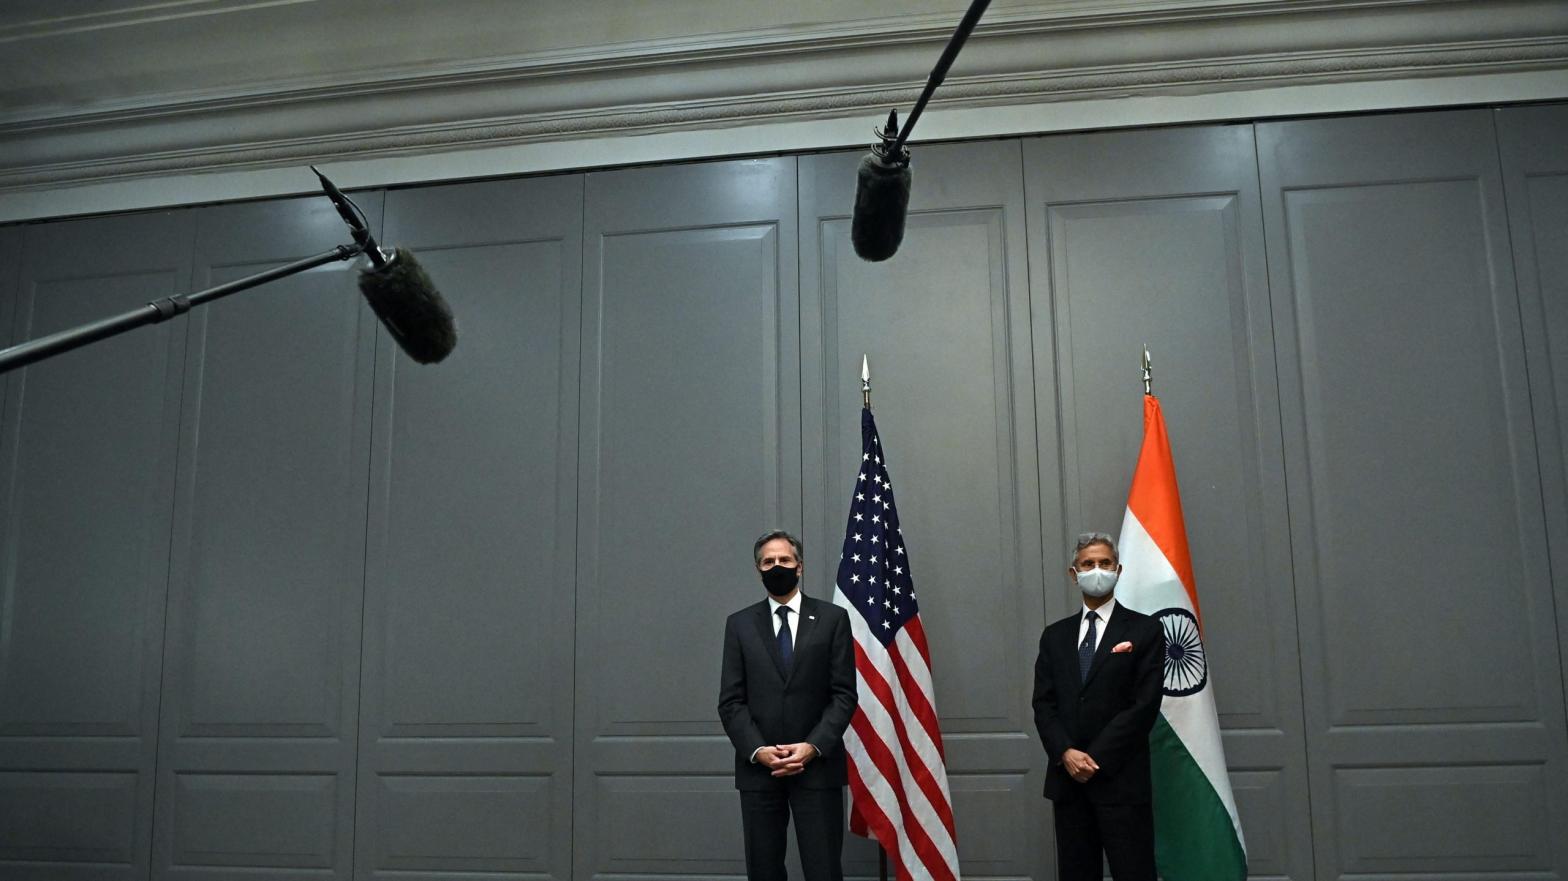 U.s. Secretary of State Antony Blinken attends a press conference with India's Foreign Minister Subrahmanyam Jaishankar following a bilateral meeting in London on May 3, 2021. (Photo: Ben Stansall, Getty Images)